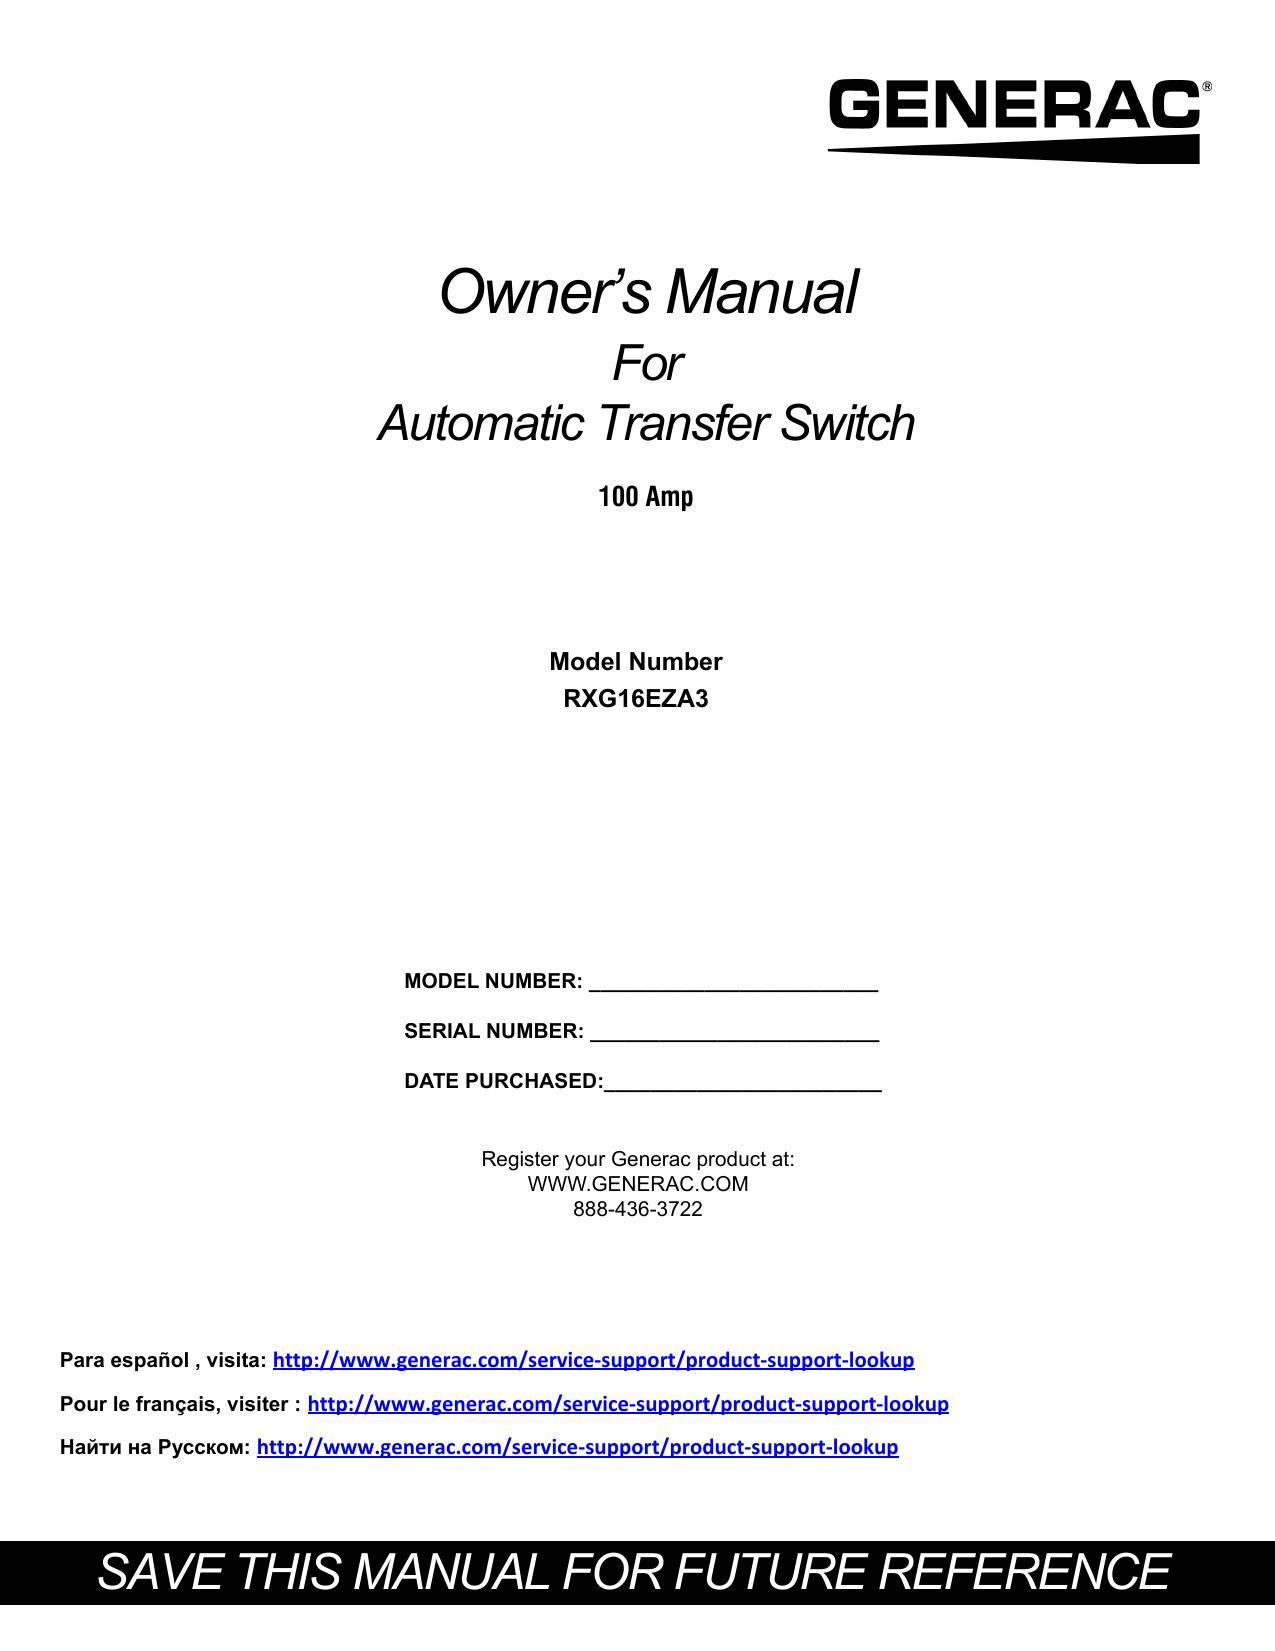 automatic-transfer-switch-owners-manual-for-model-rxg16eza3.pdf